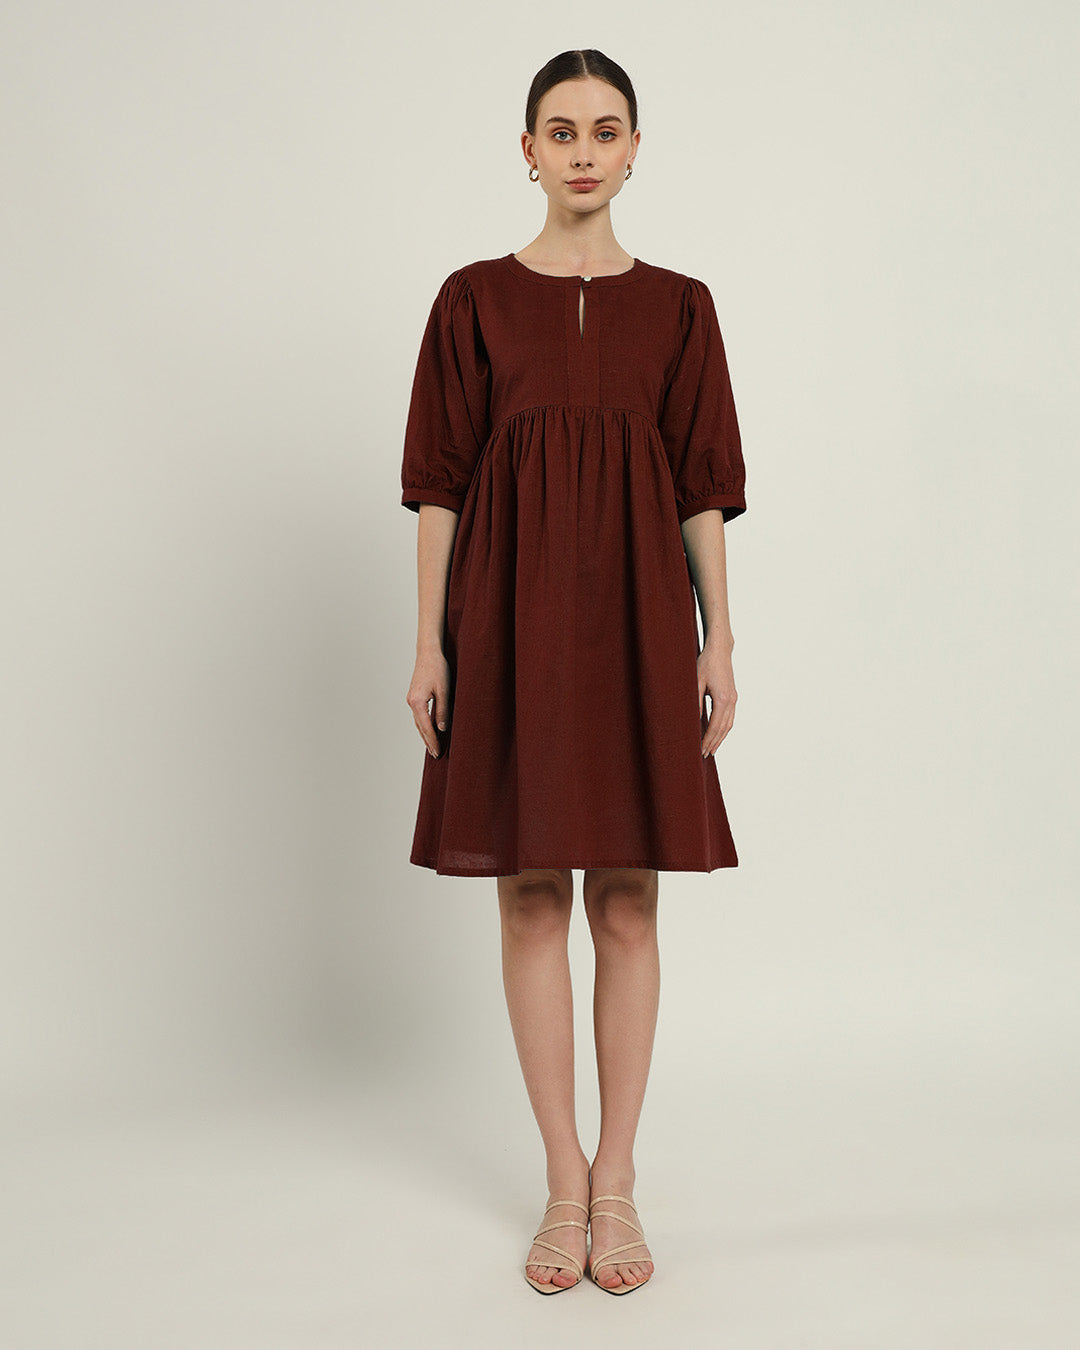 The Aira Rouge Cotton Dress